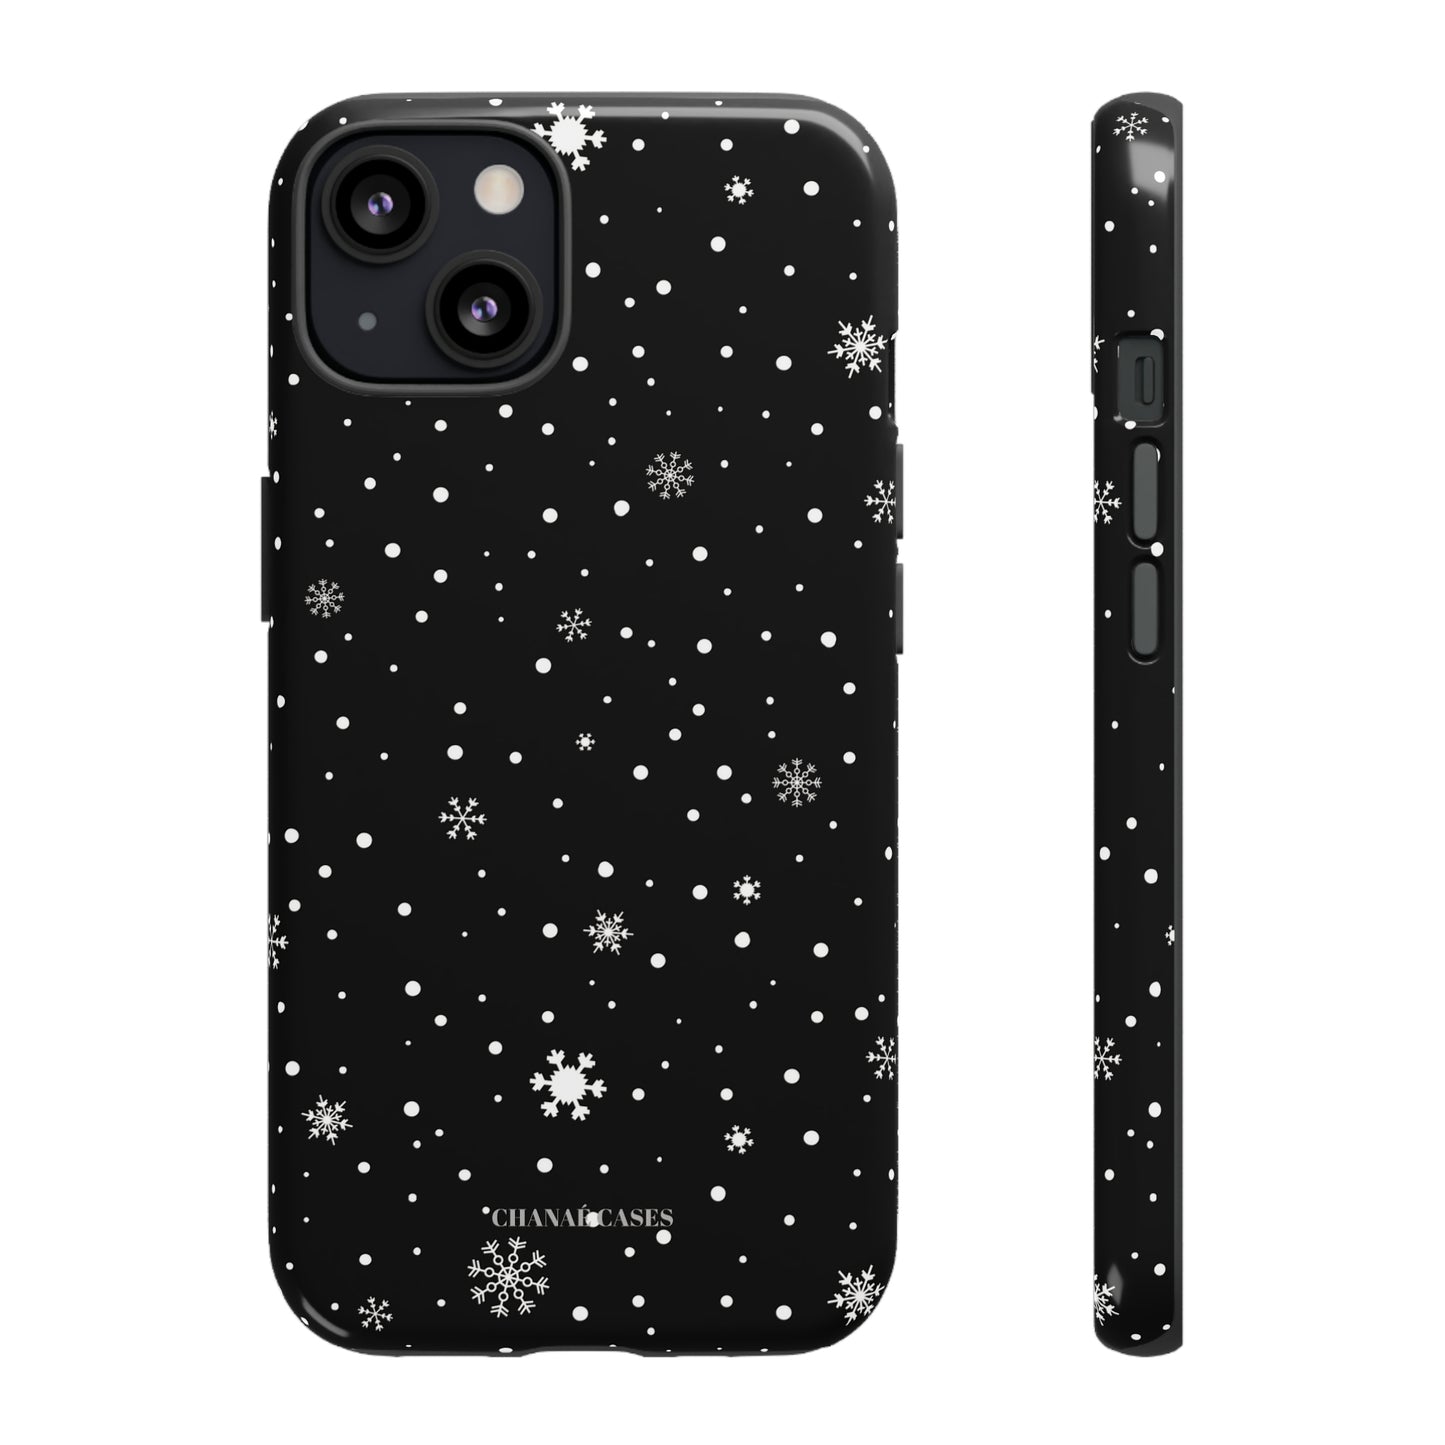 Frosty Frills iPhone "Tough" Case